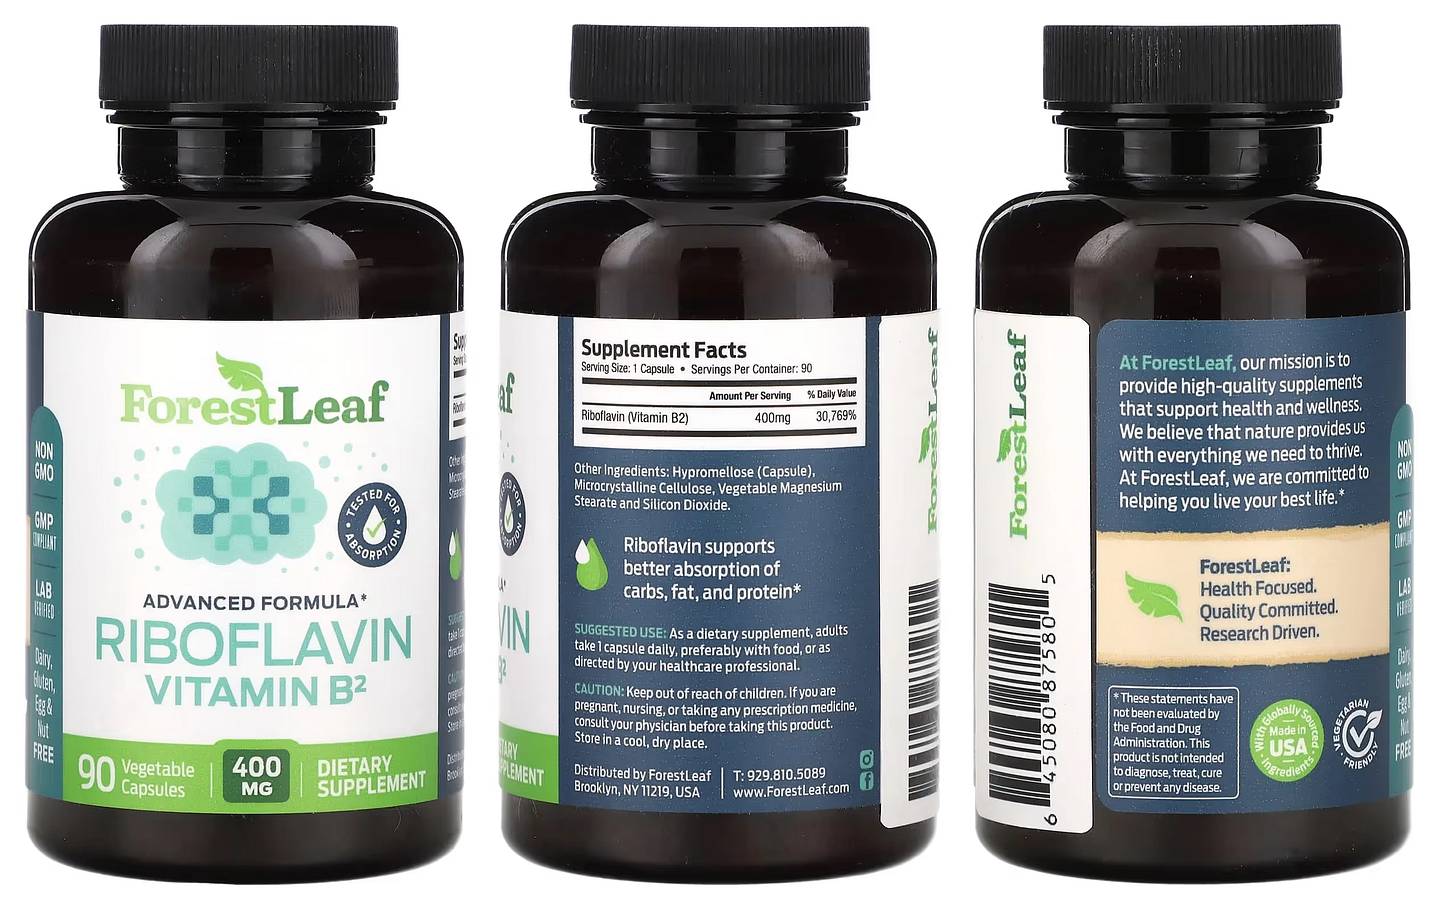 Forest Leaf, Riboflavin Vitamin B2 packaging